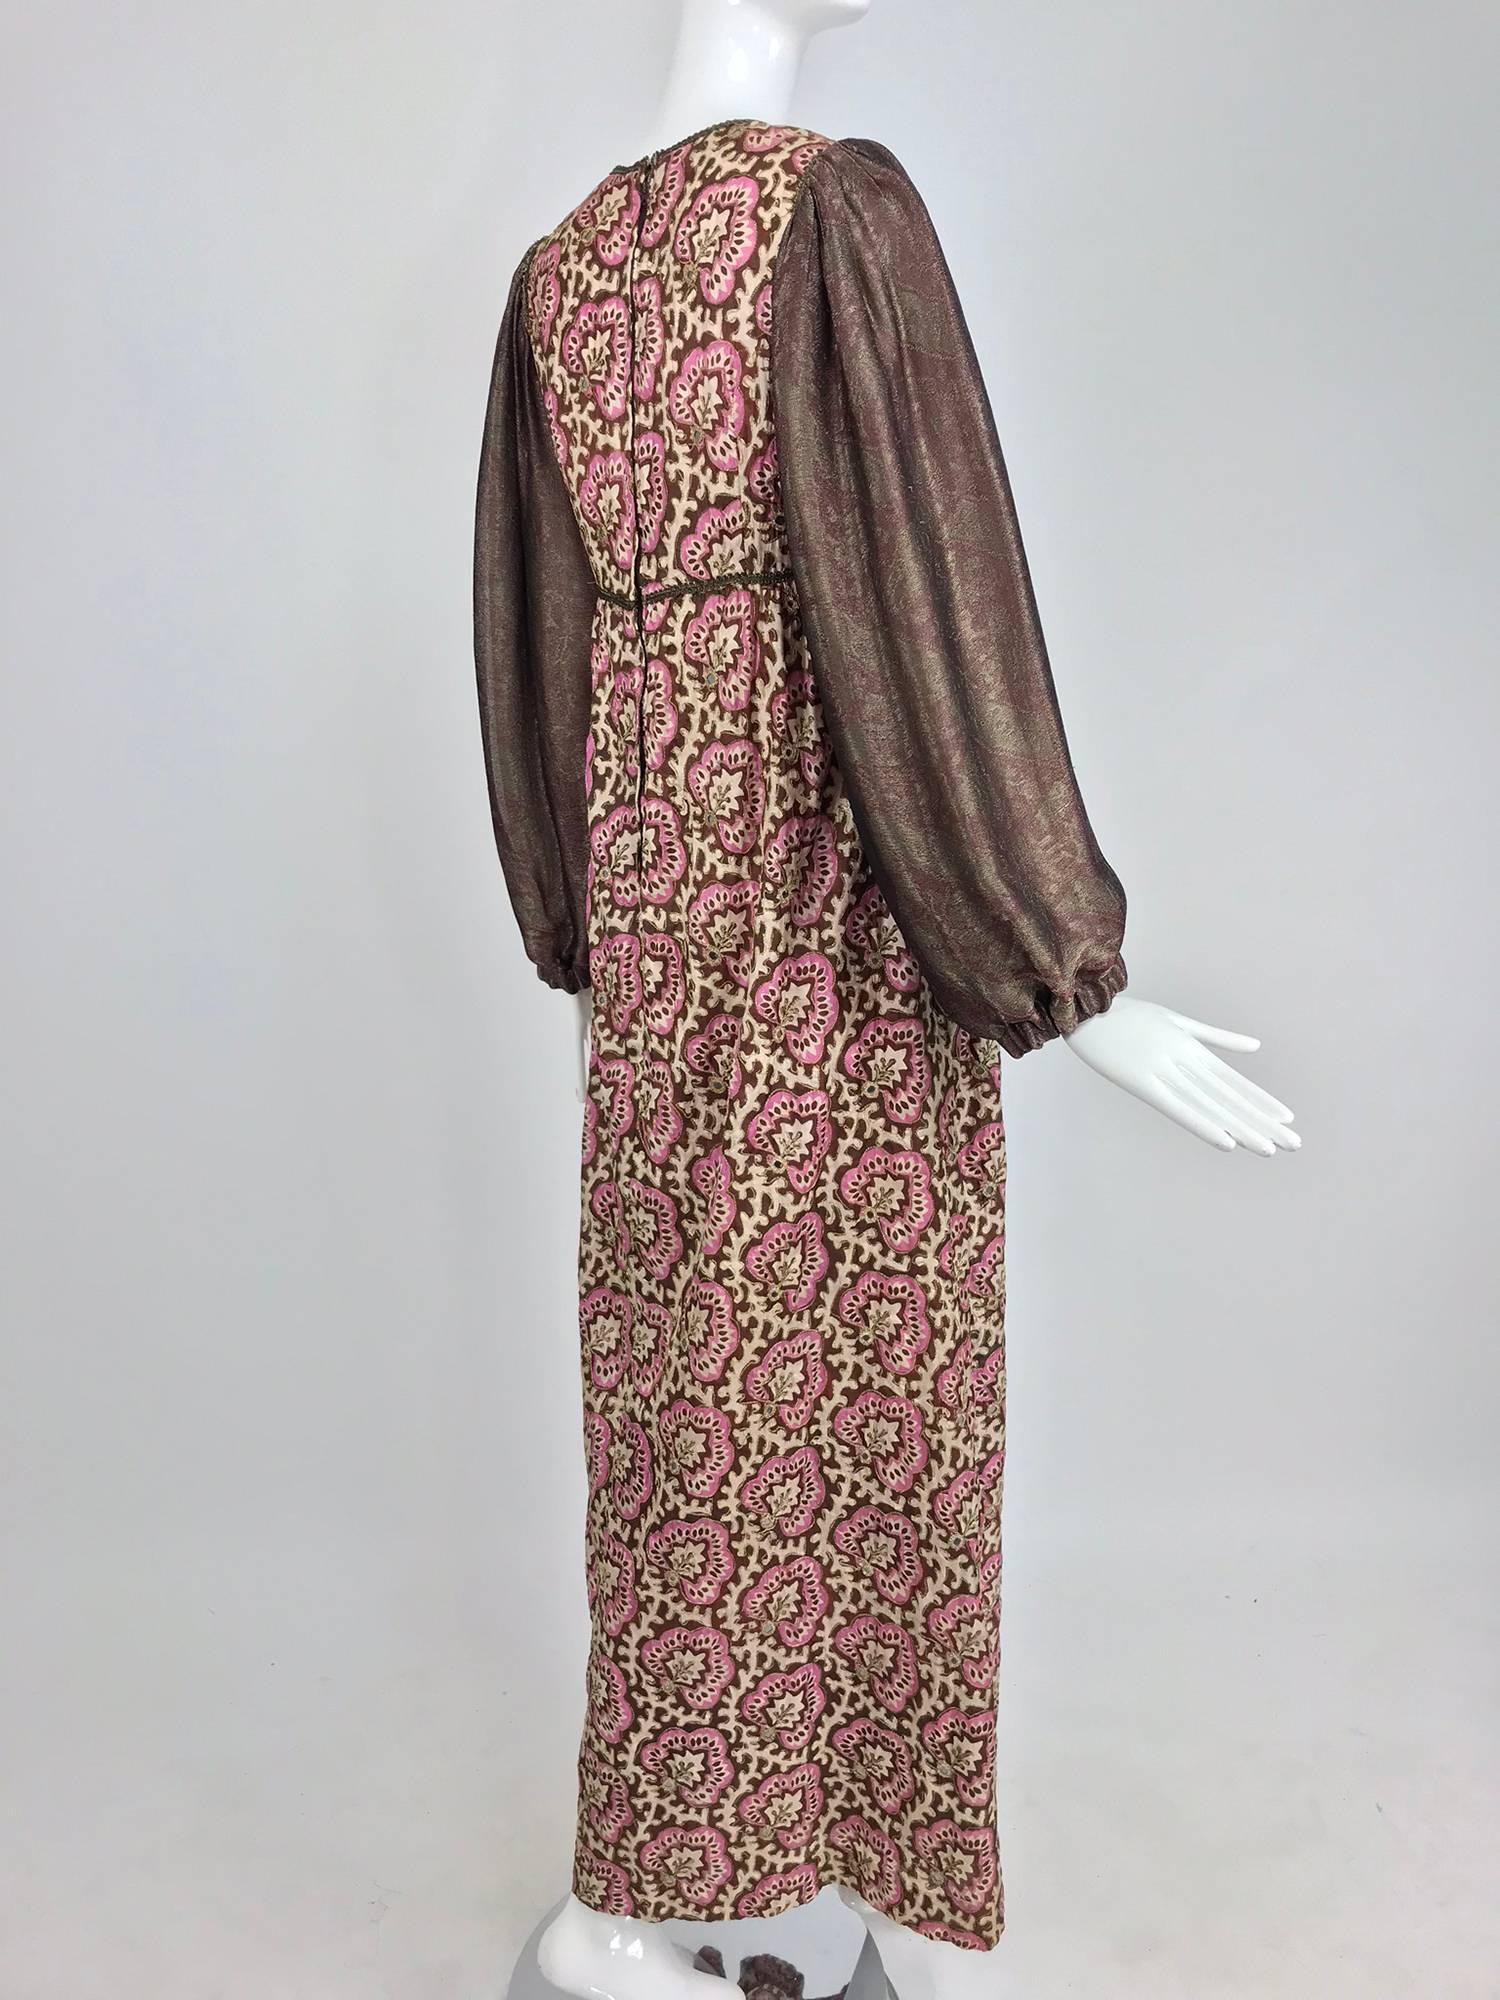 Thea Porter printed mirrored silk maxi dress with gold shot sleeves 1970s 6